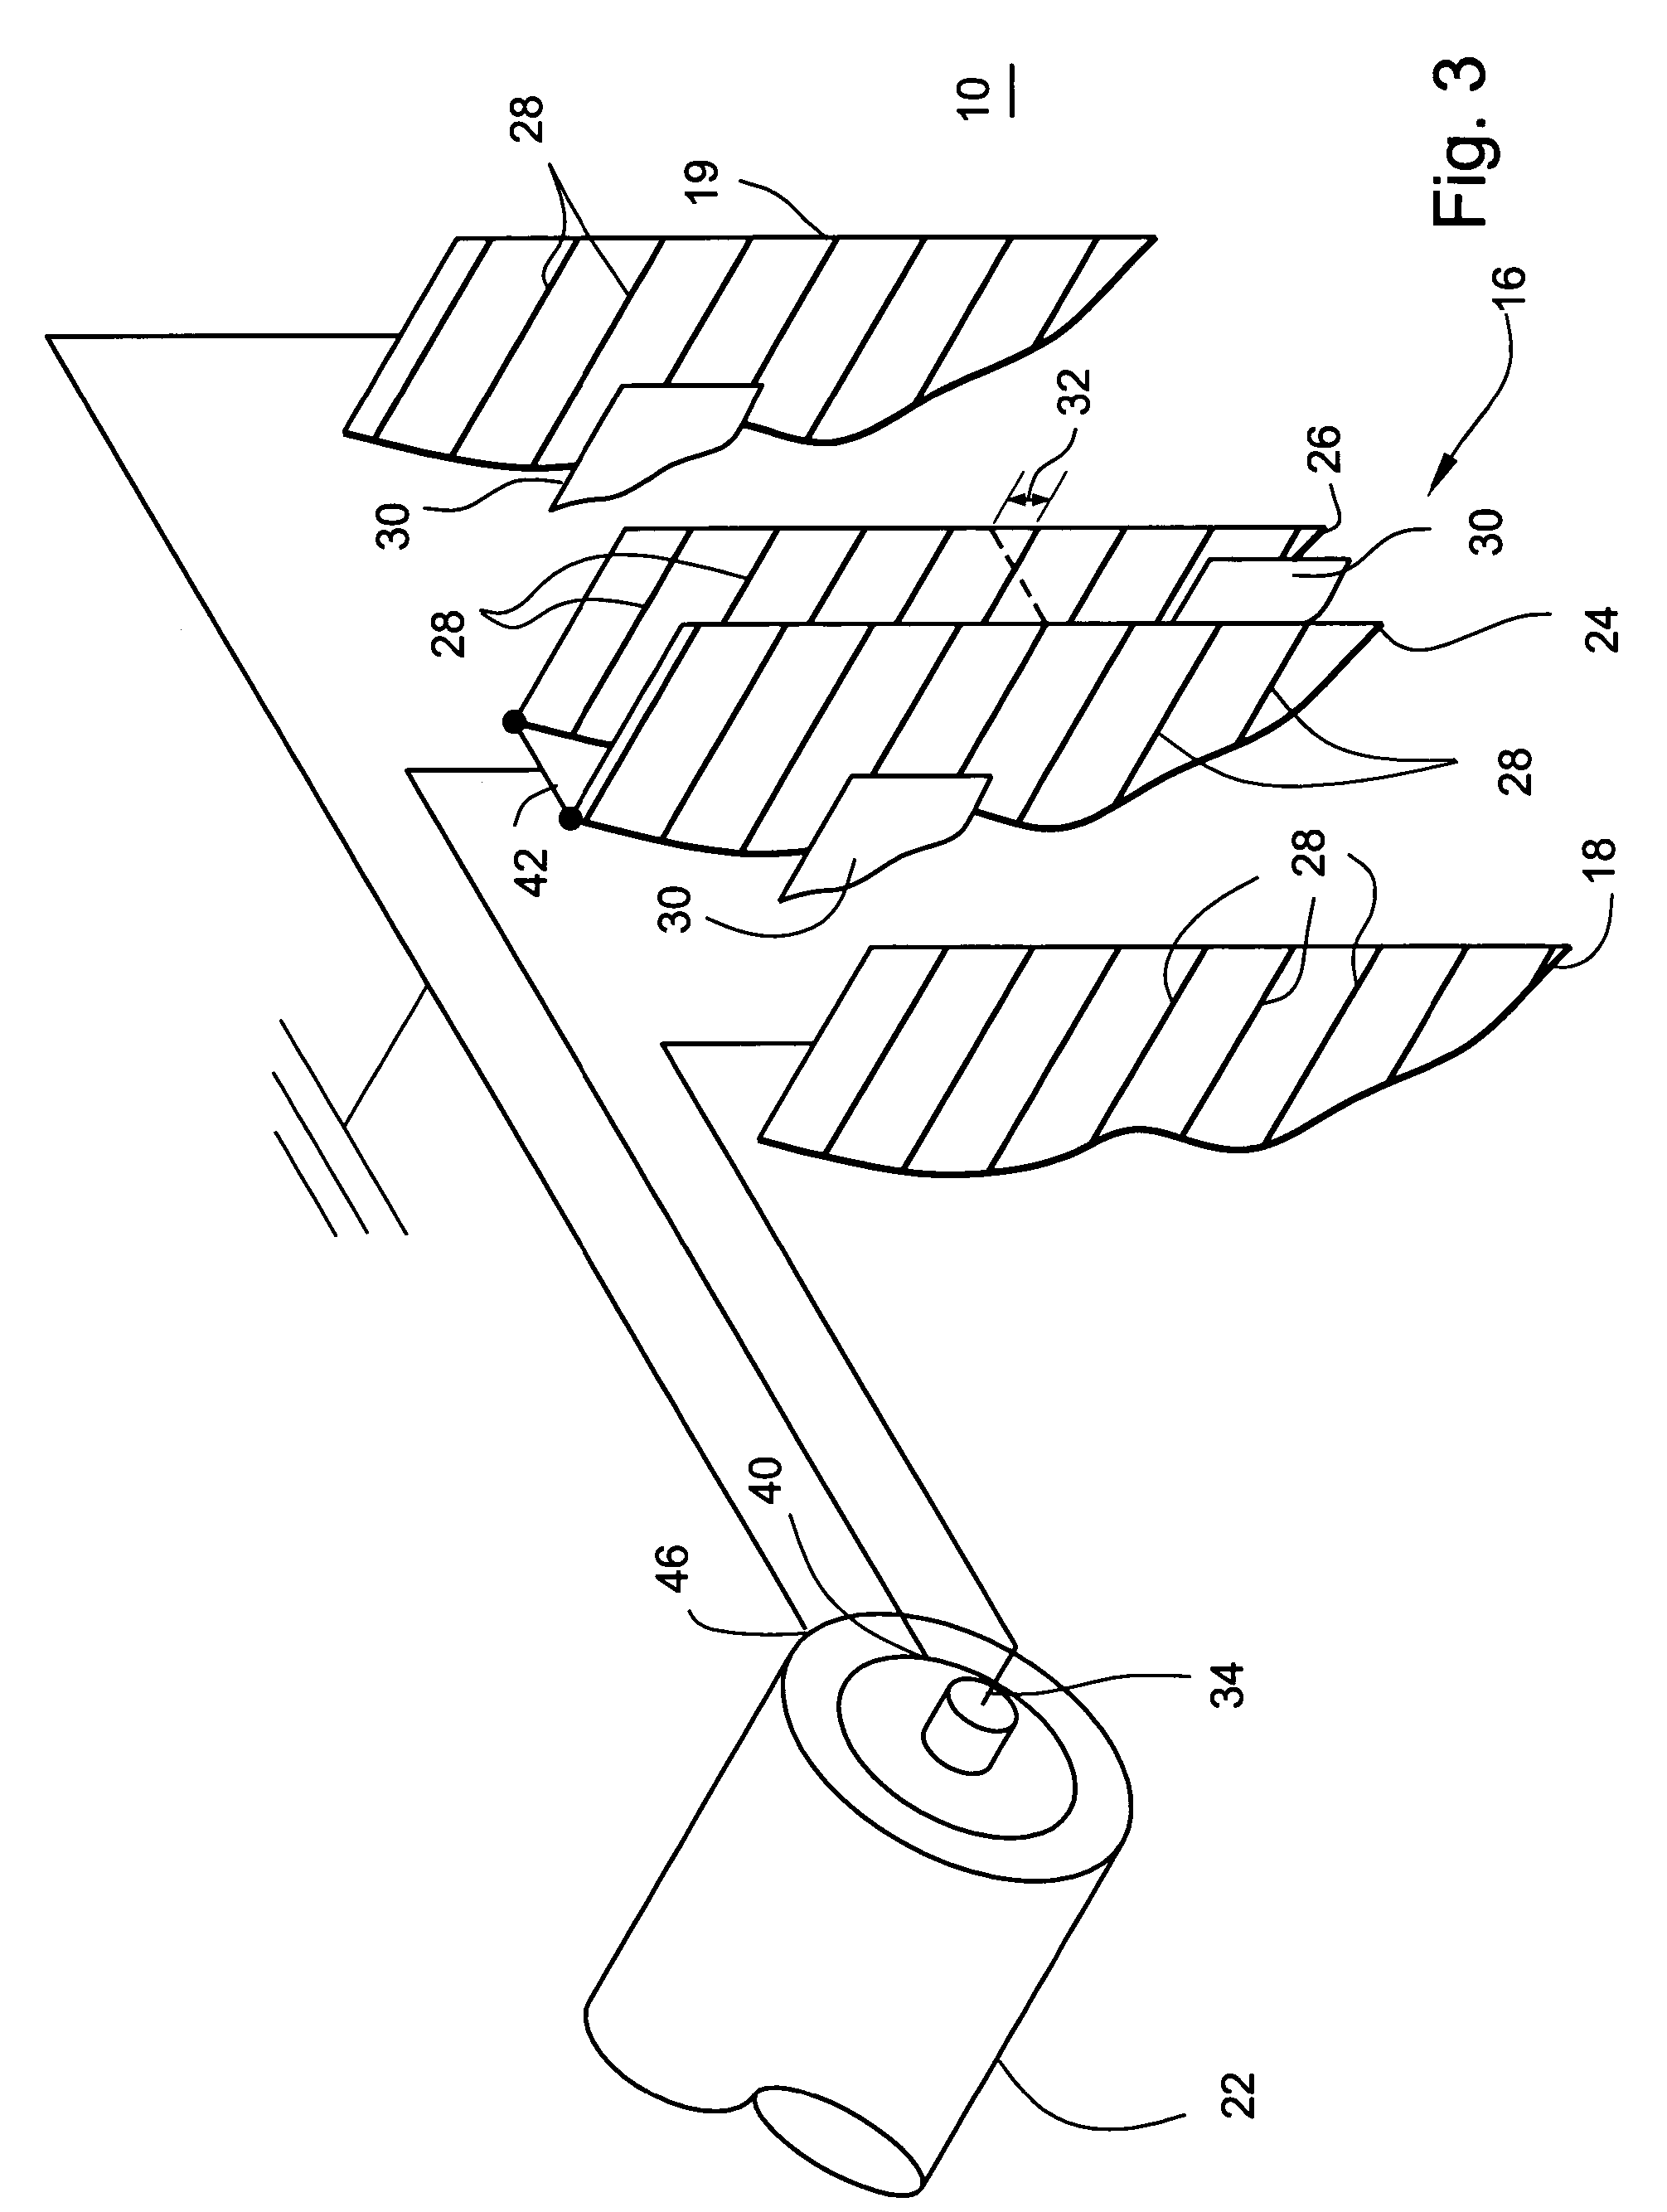 Non-contact capacitive sensor and cable with dual layer active shield